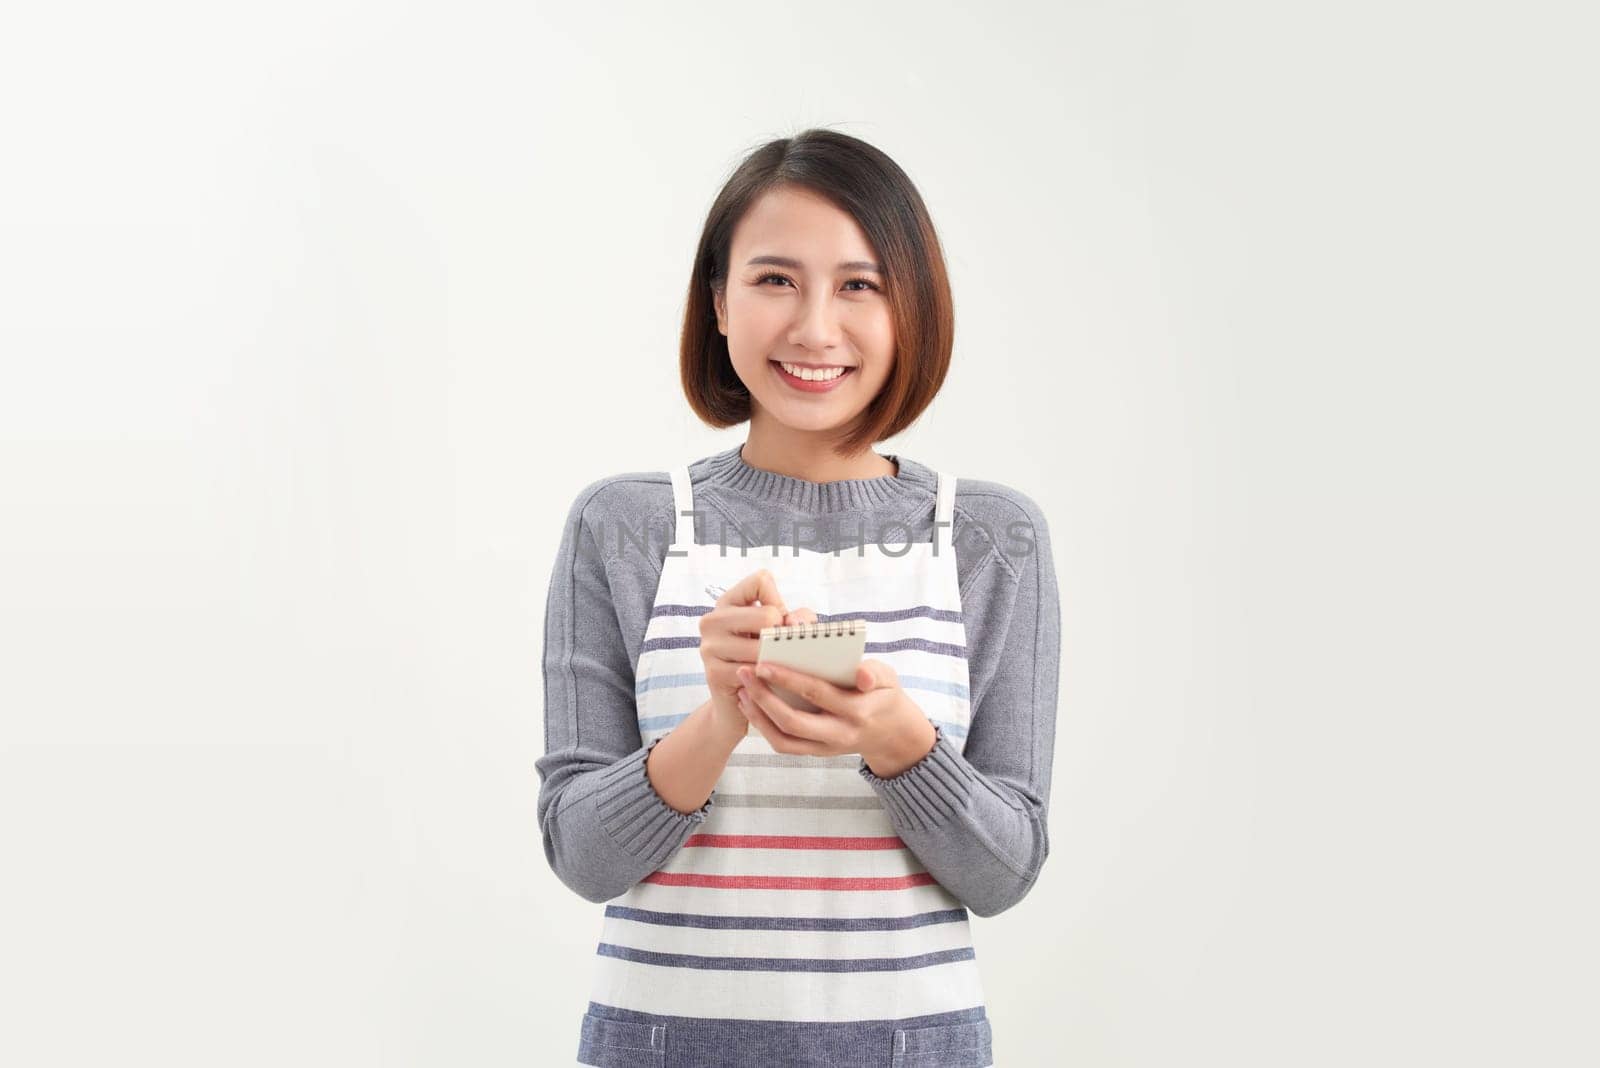 A young asian female waitress or barista taking an order on her tablet while smiling